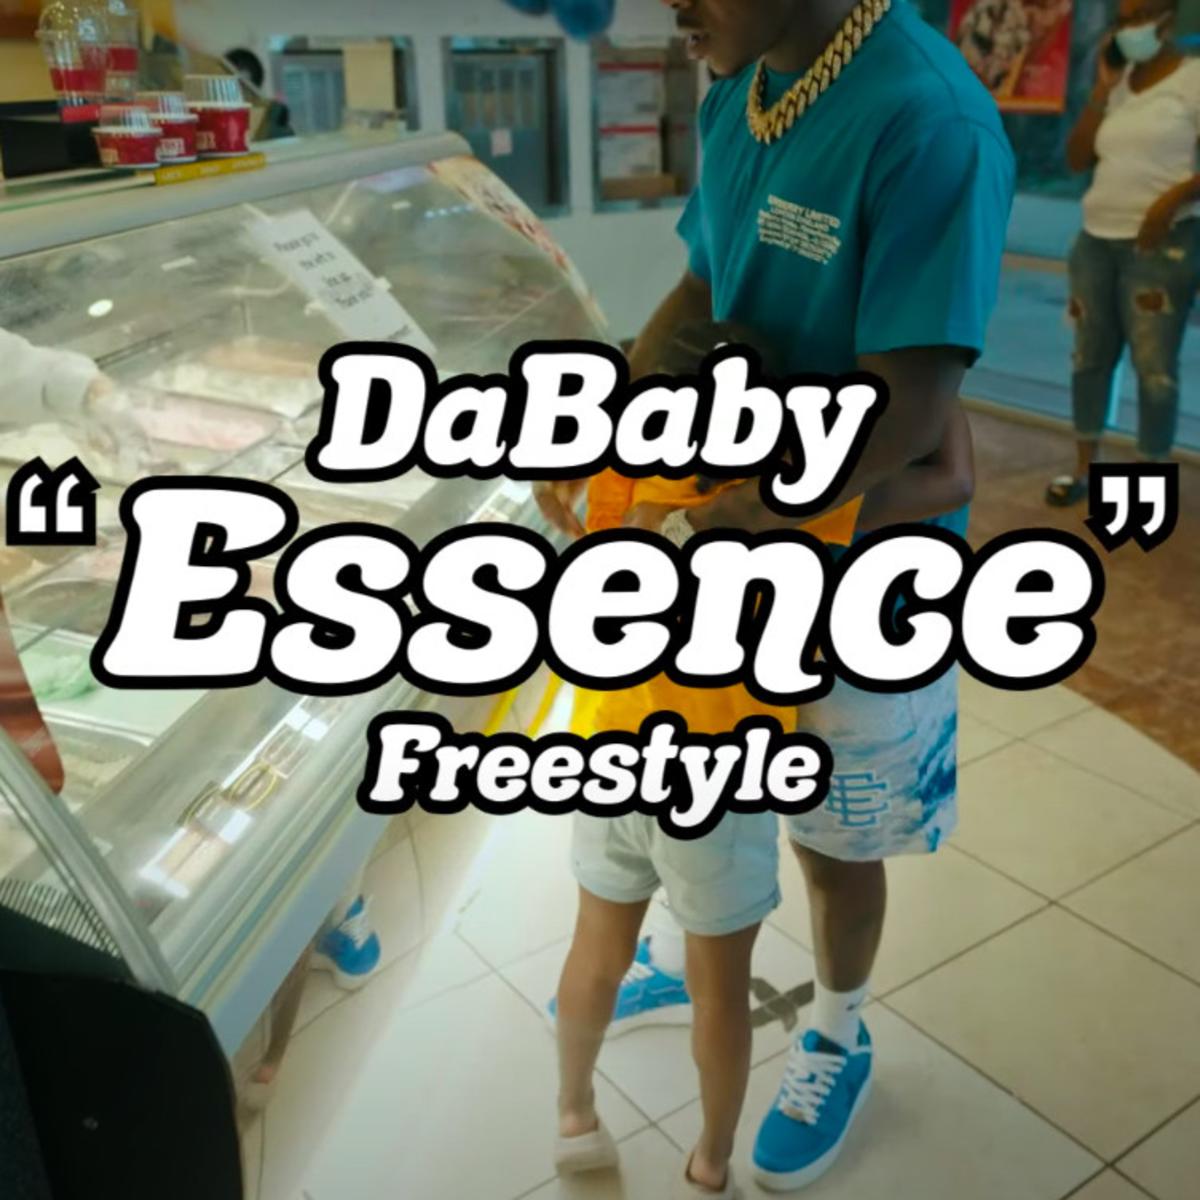 DaBaby Drops A Freestyle Over WizKid’s “Essence” Beat